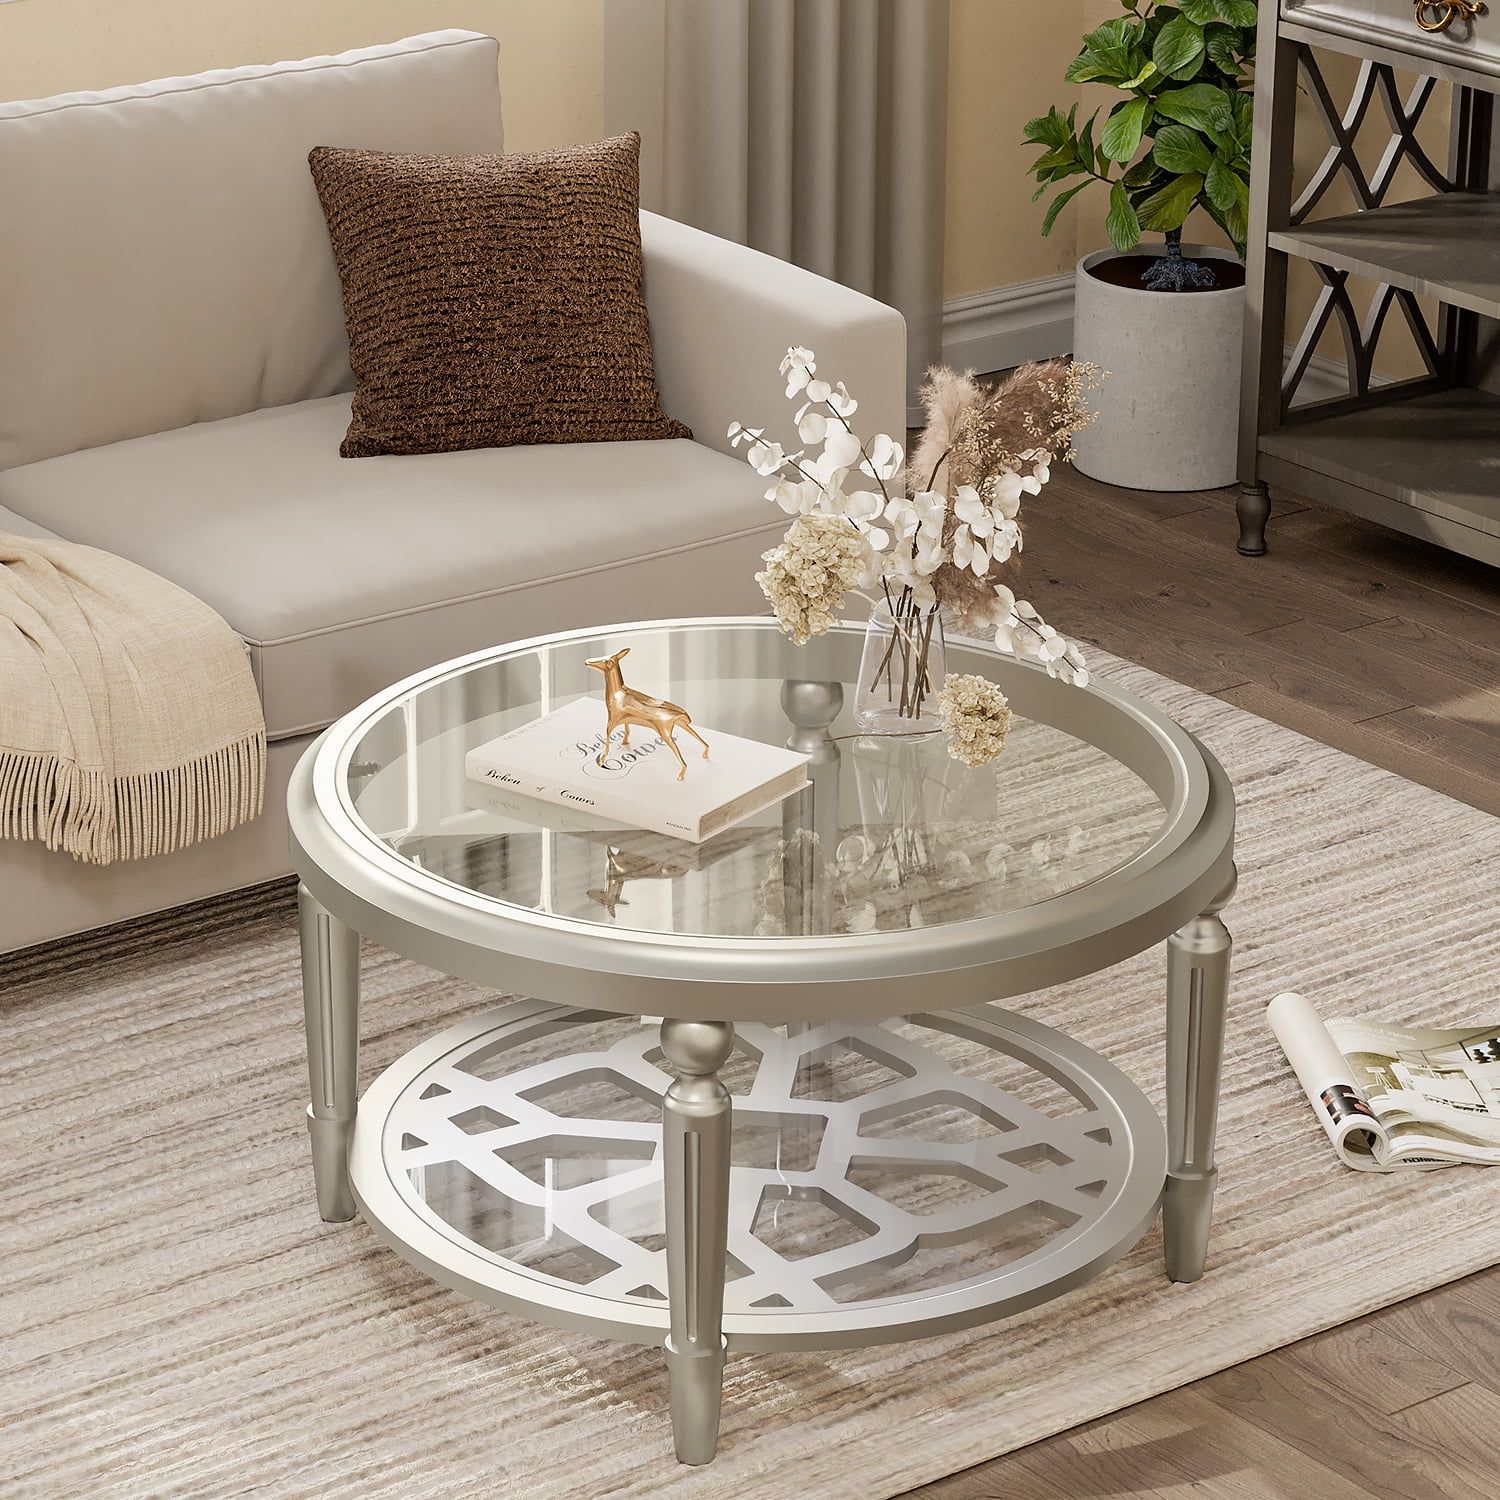 Cosiest Champagne Double Tempered Glass Round Coffee Table – Walmart Regarding Tempered Glass Coffee Tables (View 4 of 15)